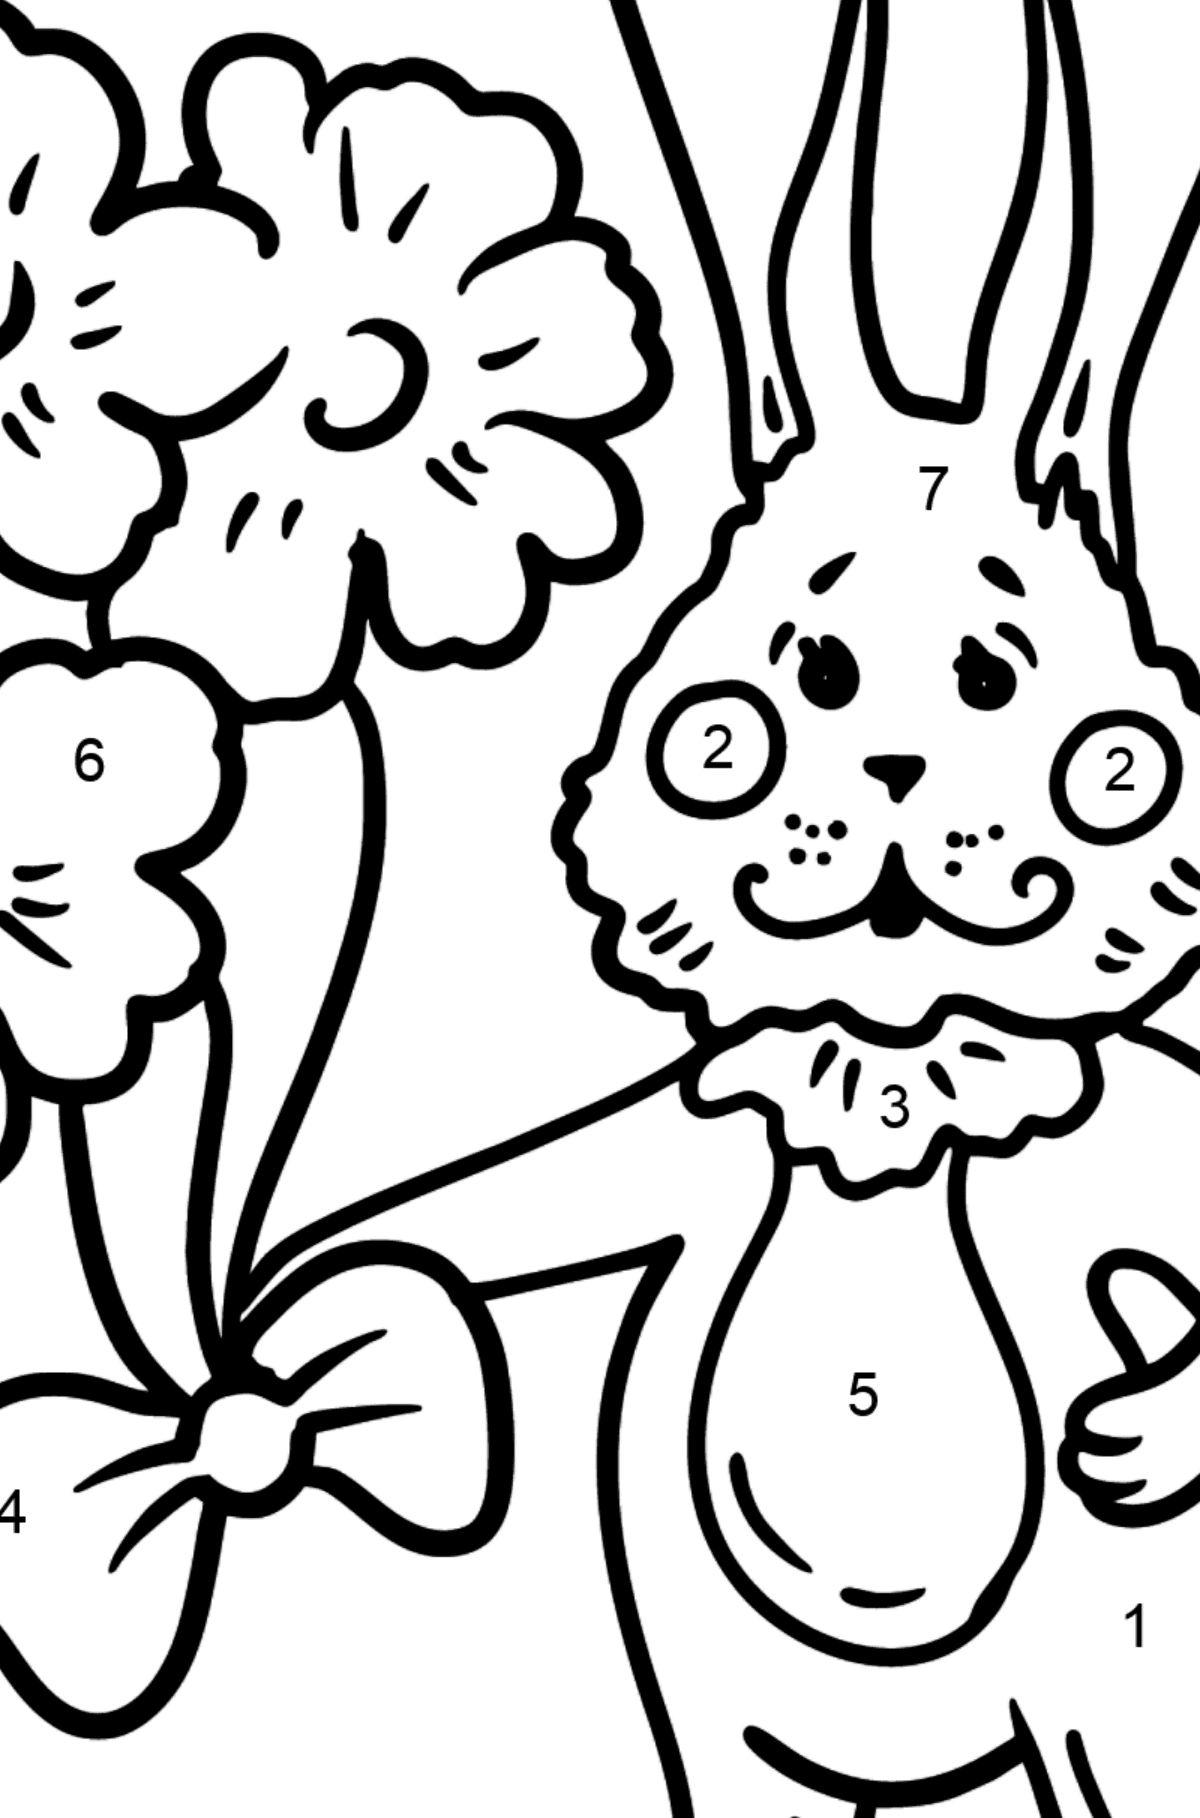 Bunny with a Bouquet of Flowers coloring page - Coloring by Numbers for Kids